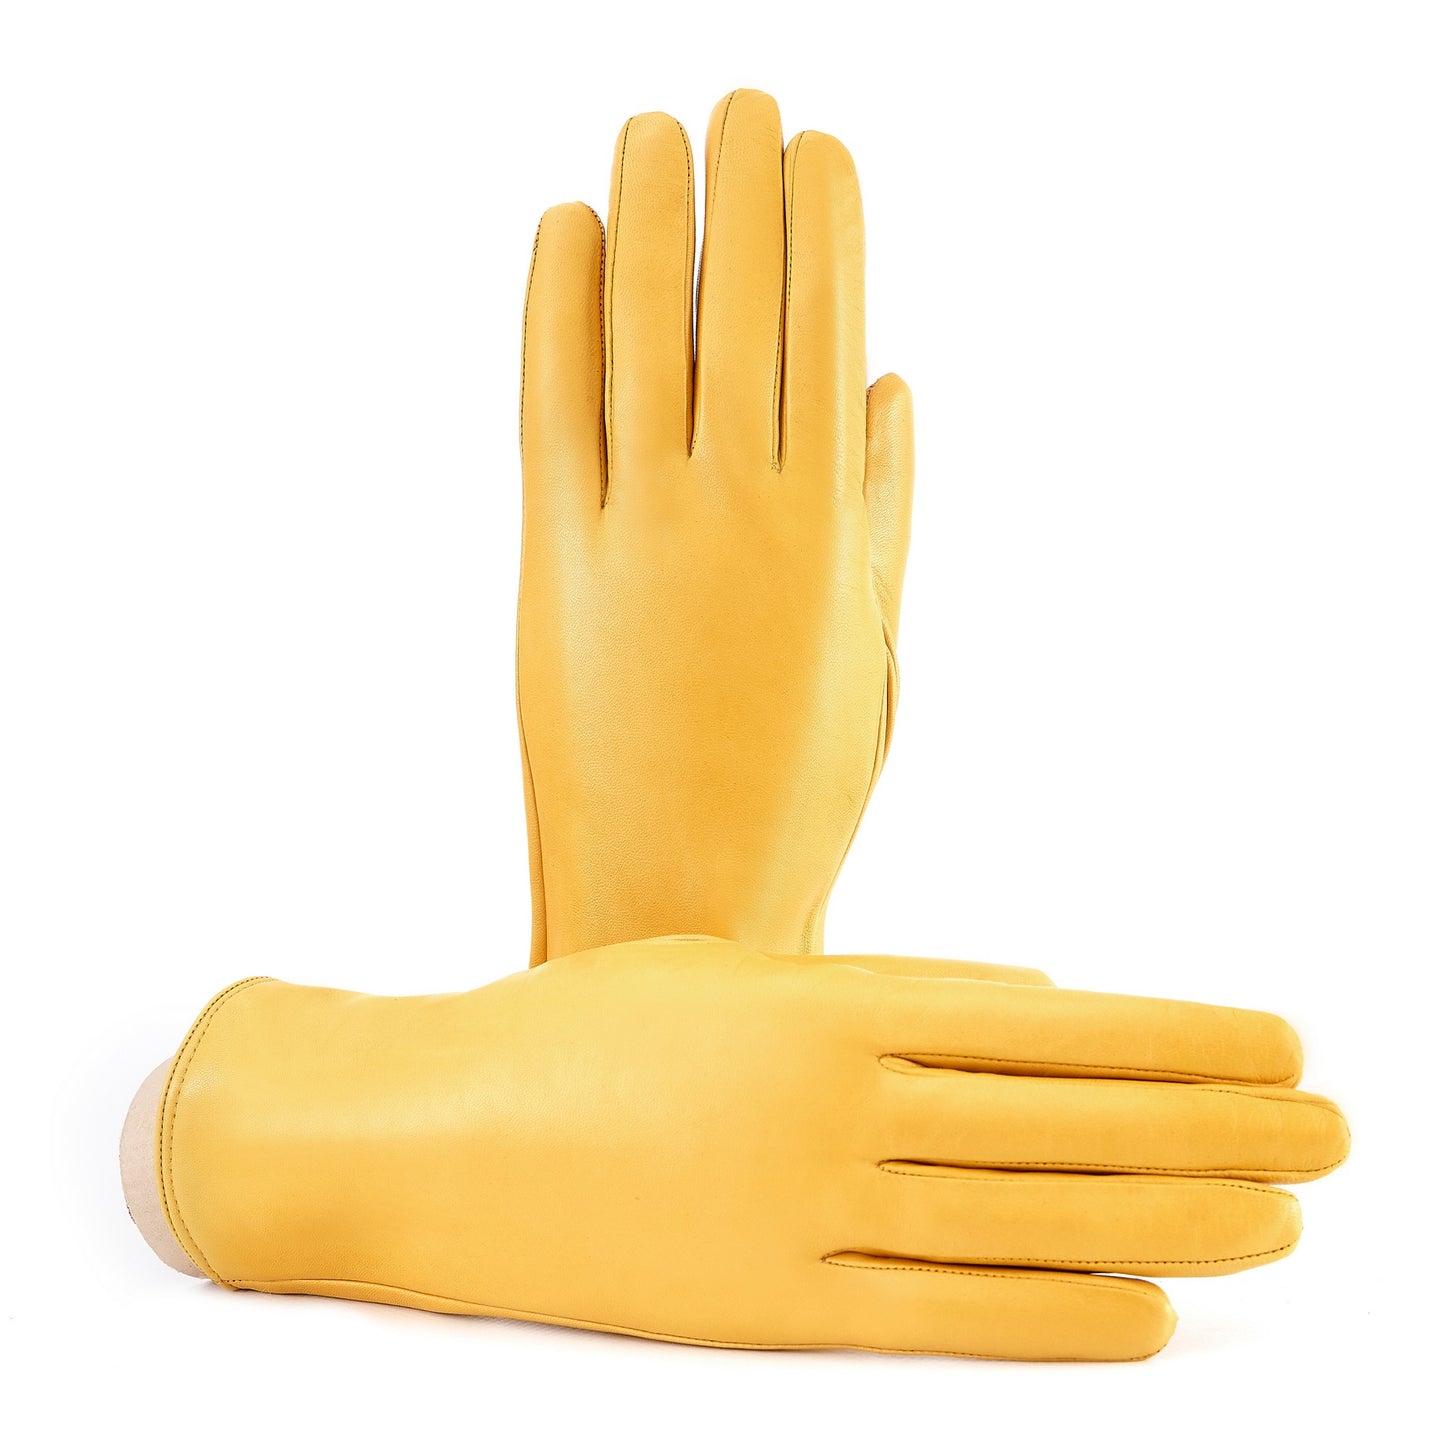 Women’s basic yellow soft nappa leather gloves with palm opening and mix cashmere lining